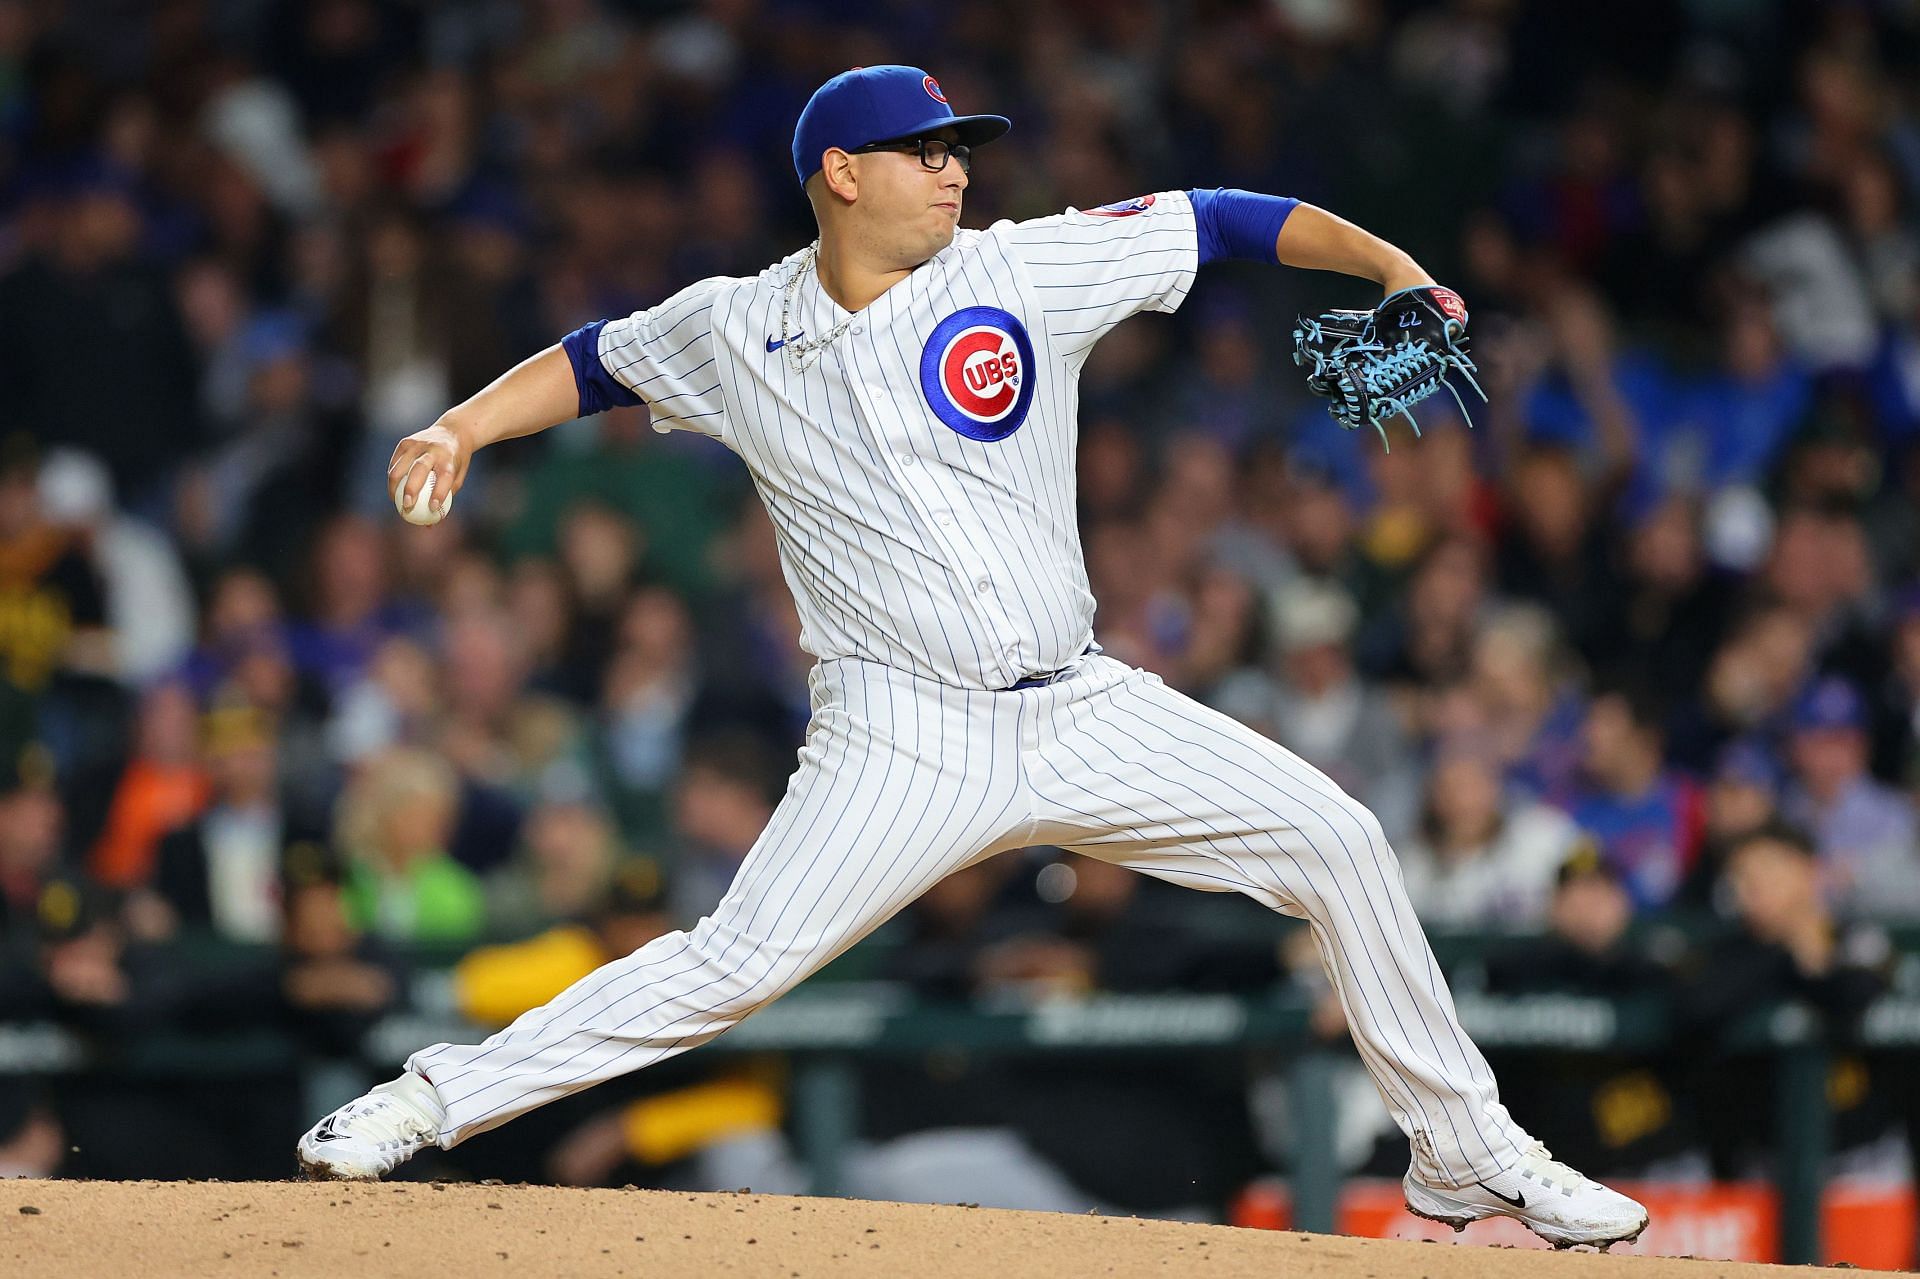 The Cubs are looking to improve their pitching staff through pitchers like Wicks and Assad.